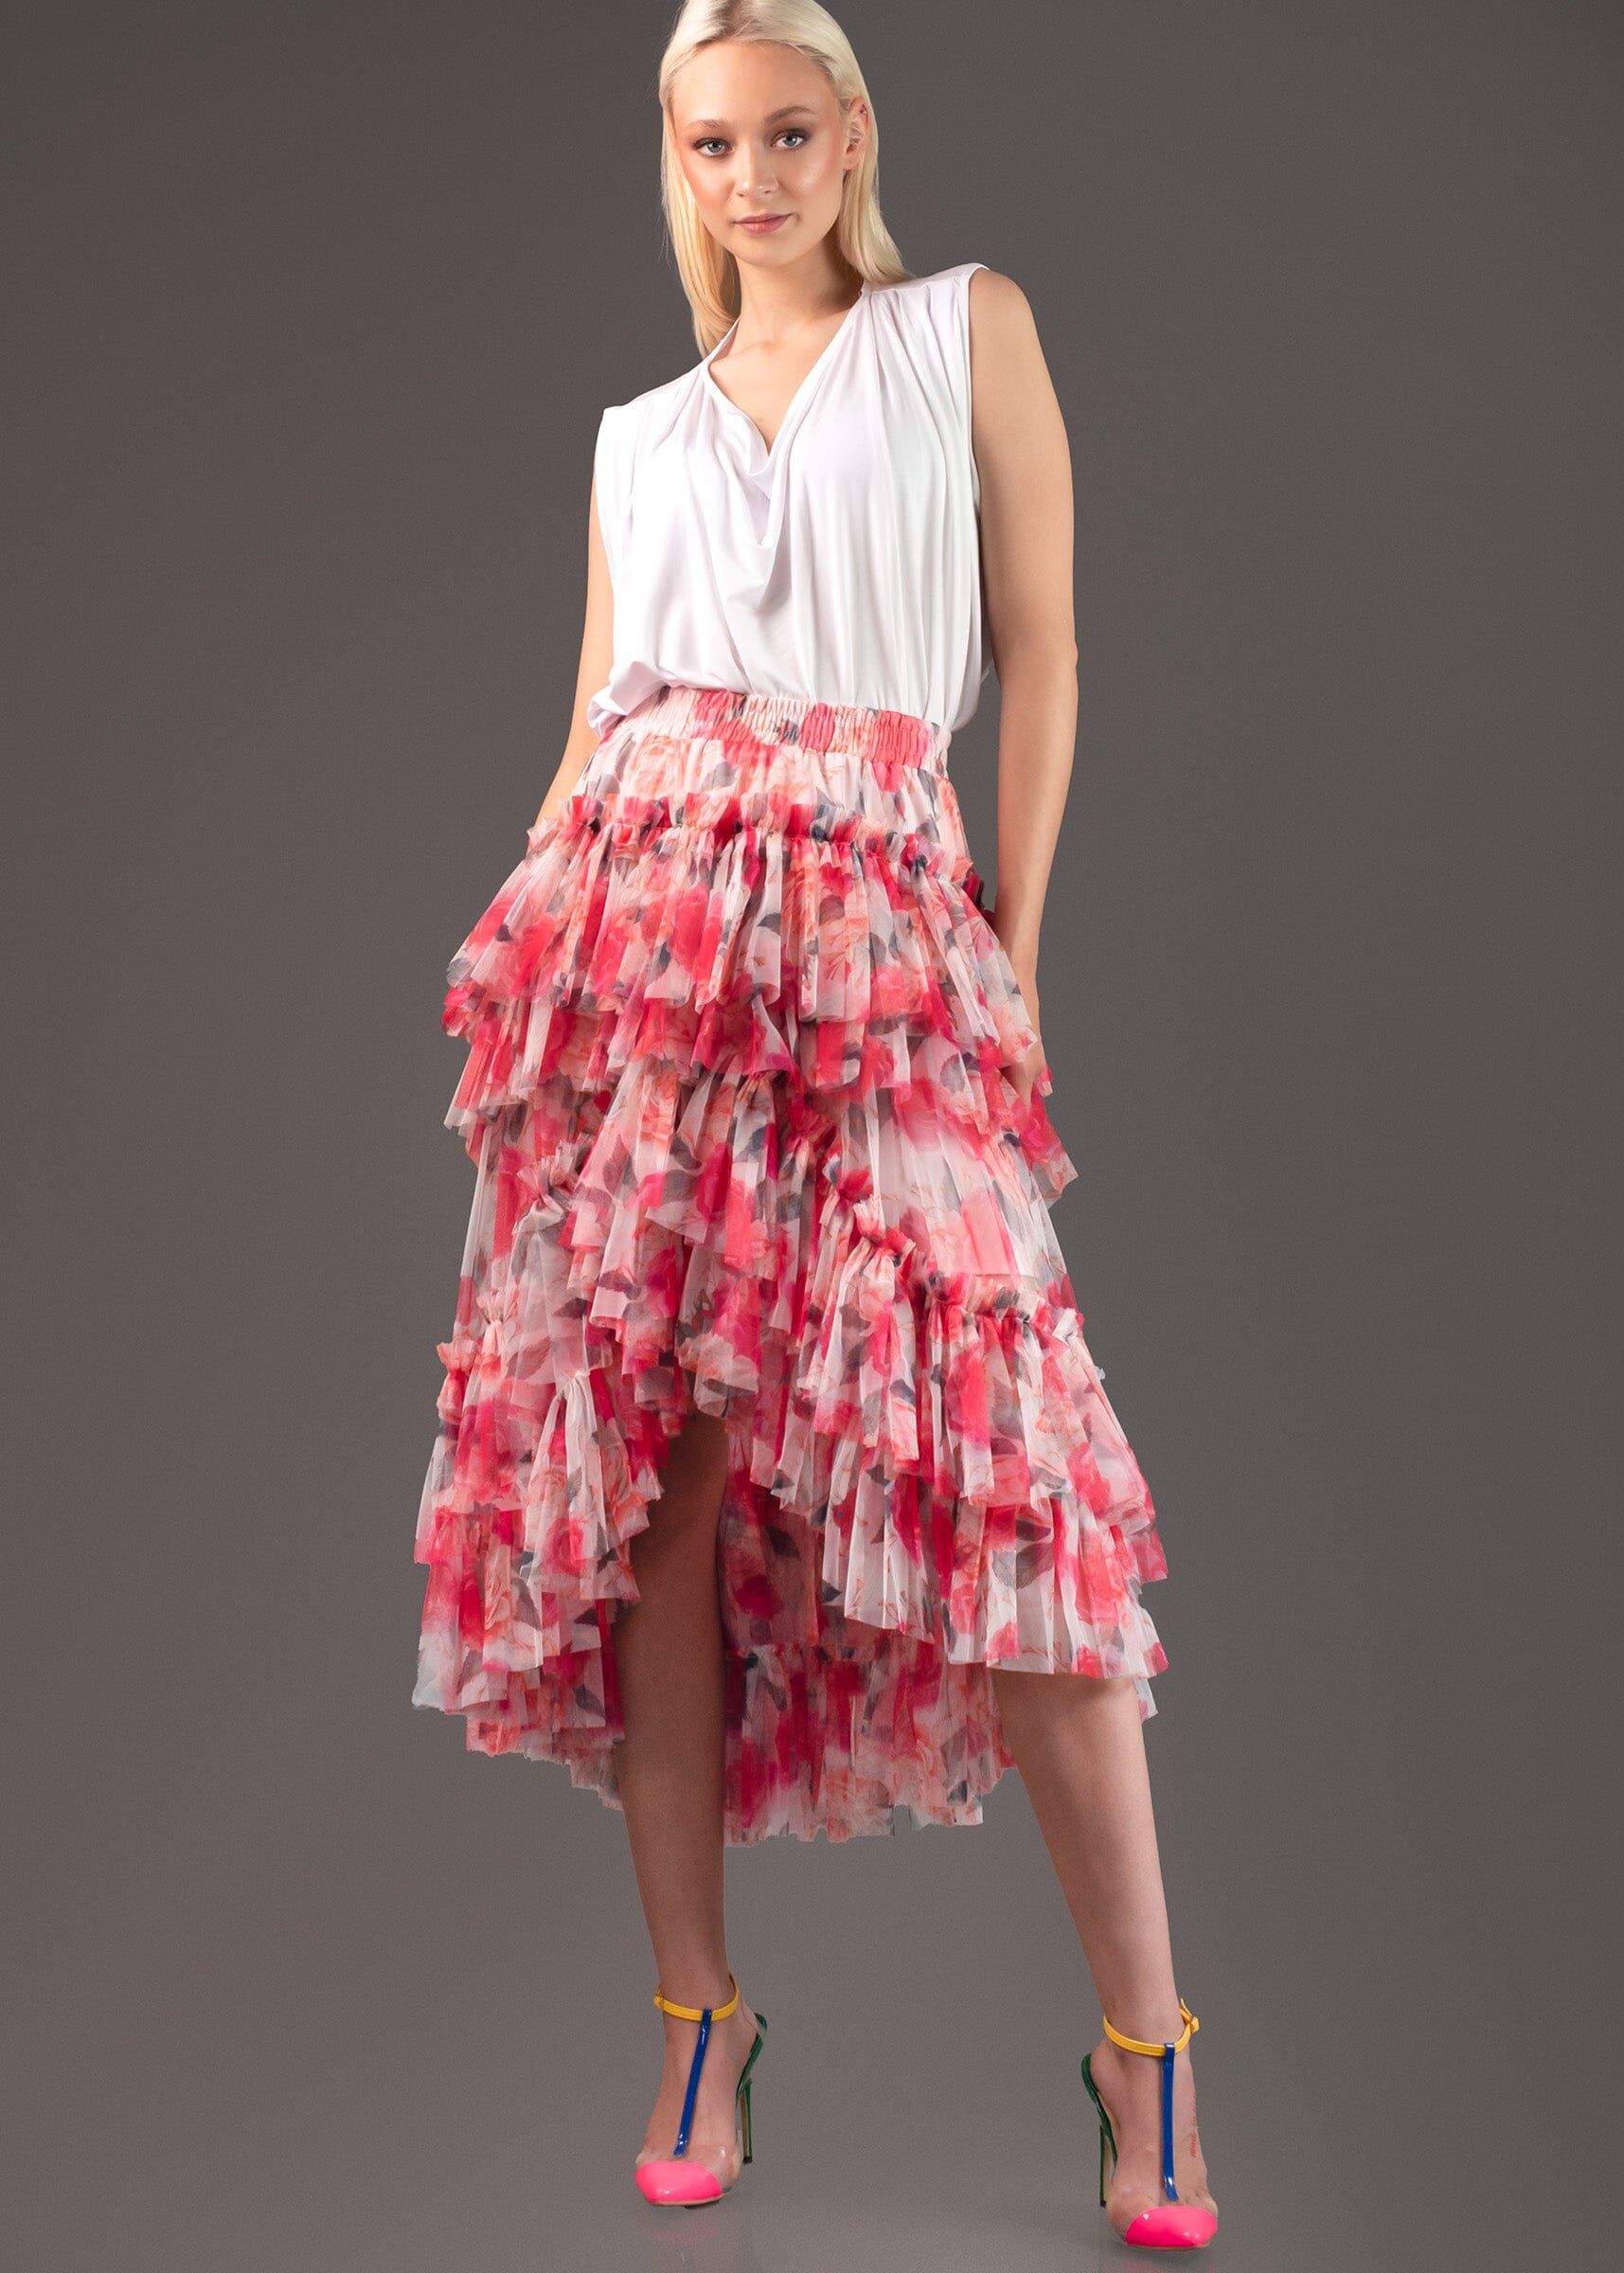 Floral Tiered Tulle Skirt Skirts Kate Hewko 